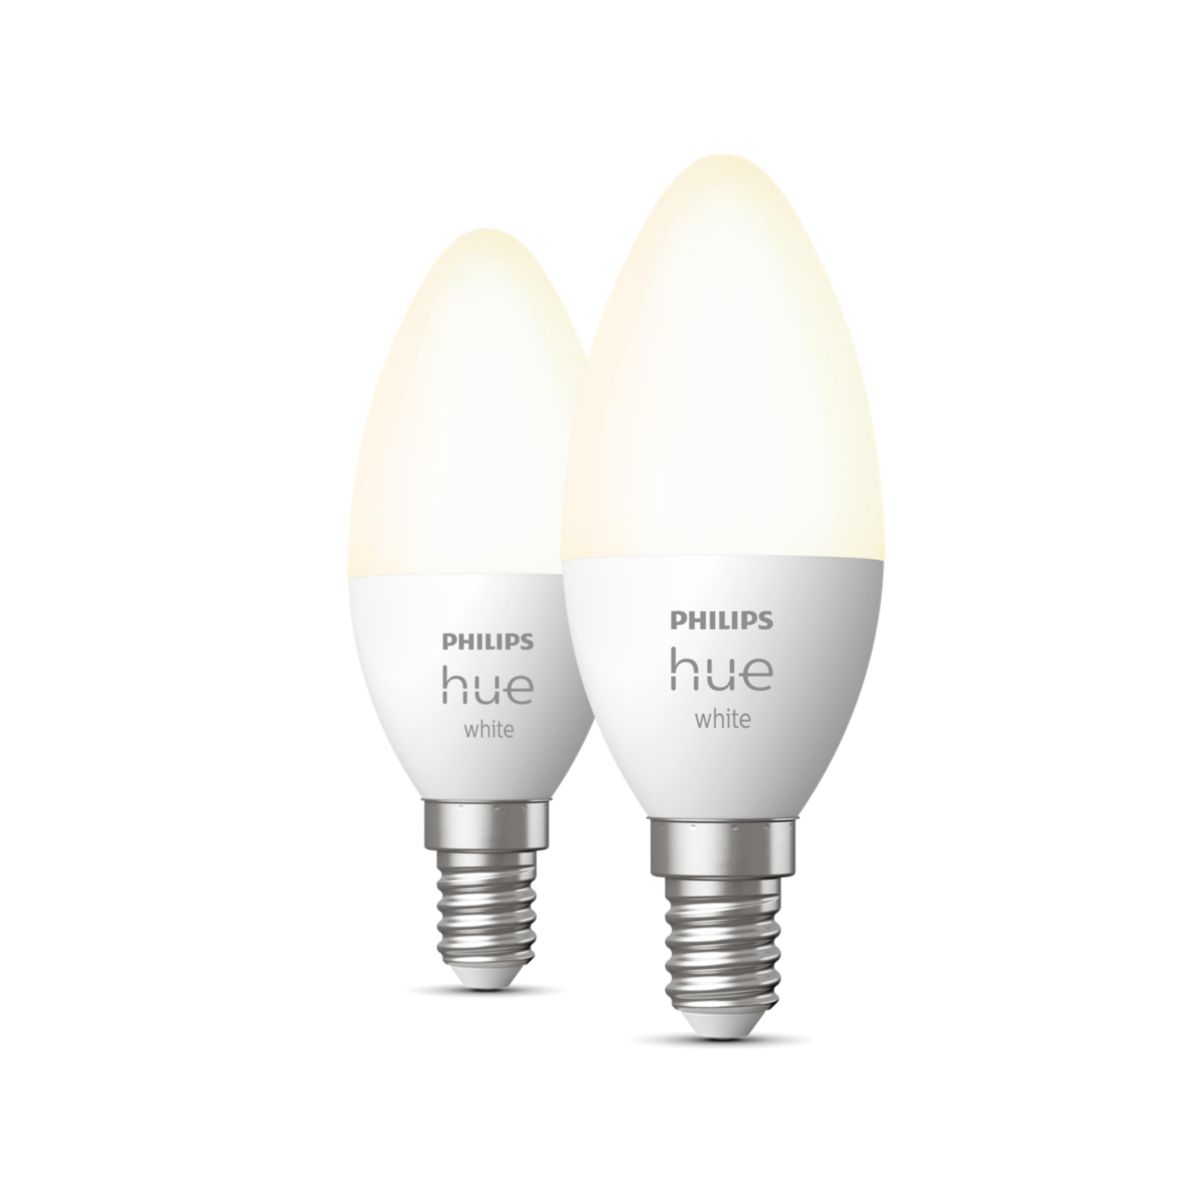 Philips Hue E14 kaarslamp wit 470lm 2-pack